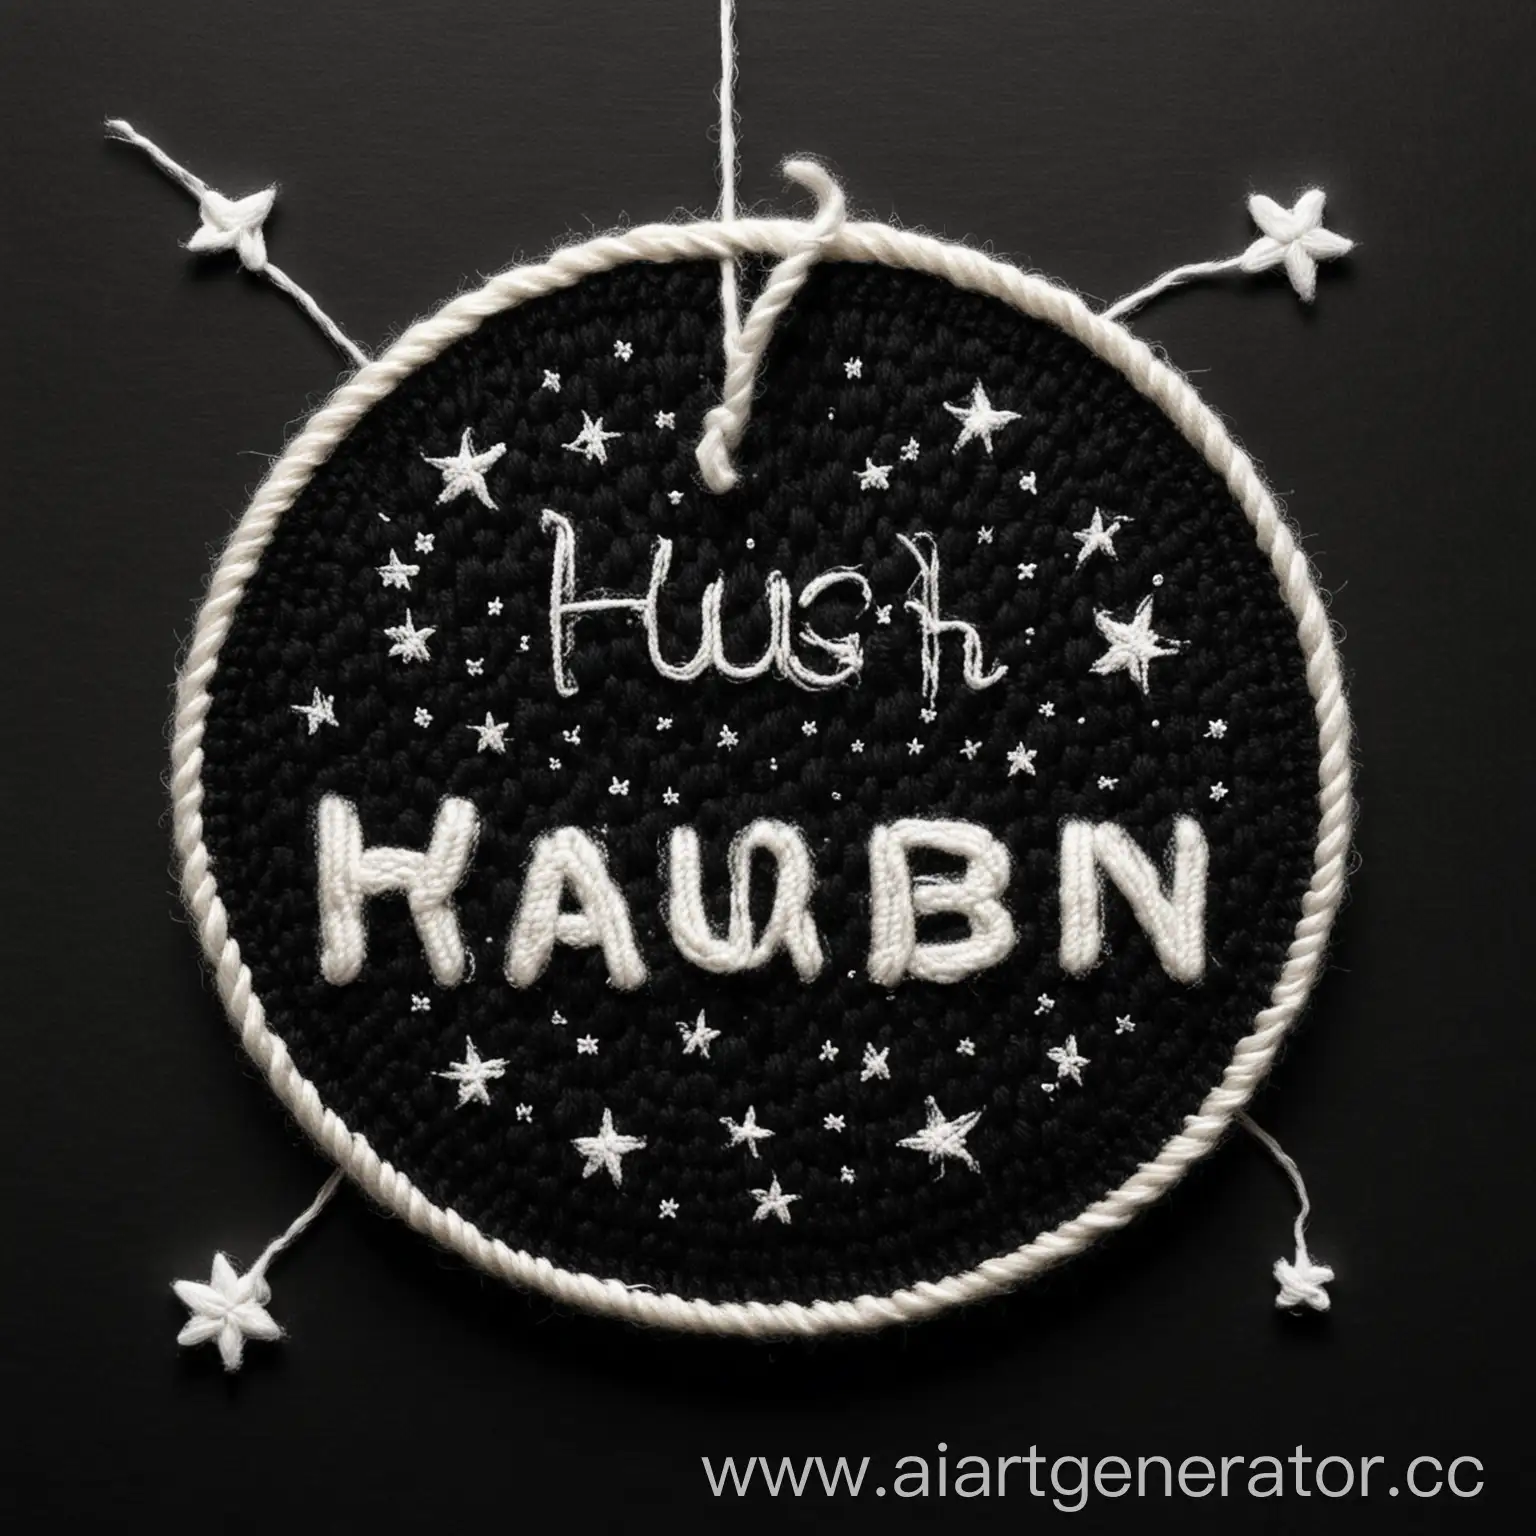 Knitting-Ball-of-Yarn-and-Hook-Logo-on-Sparkling-Black-Background